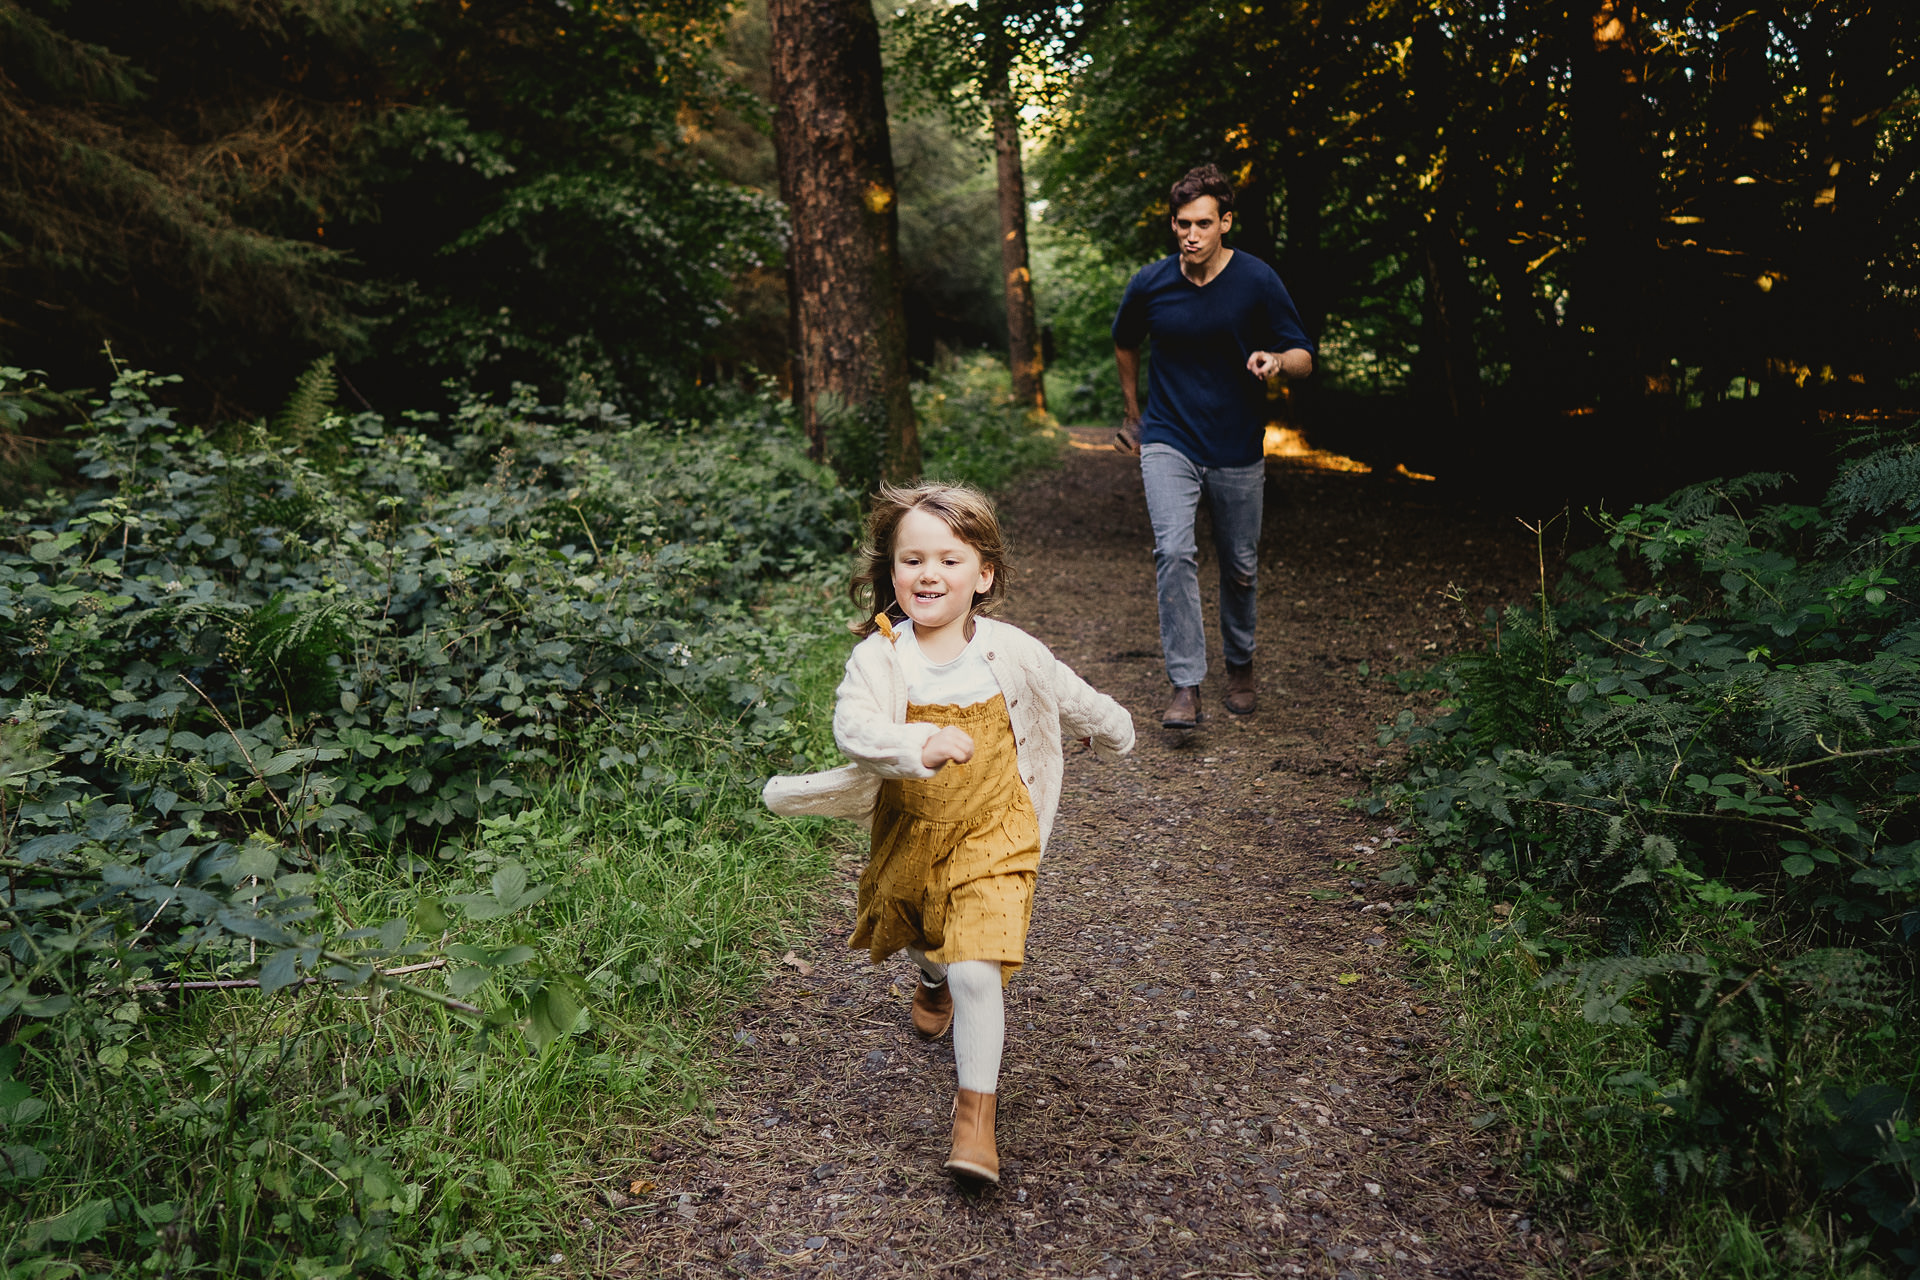 A father running with young daughter on a woodland path